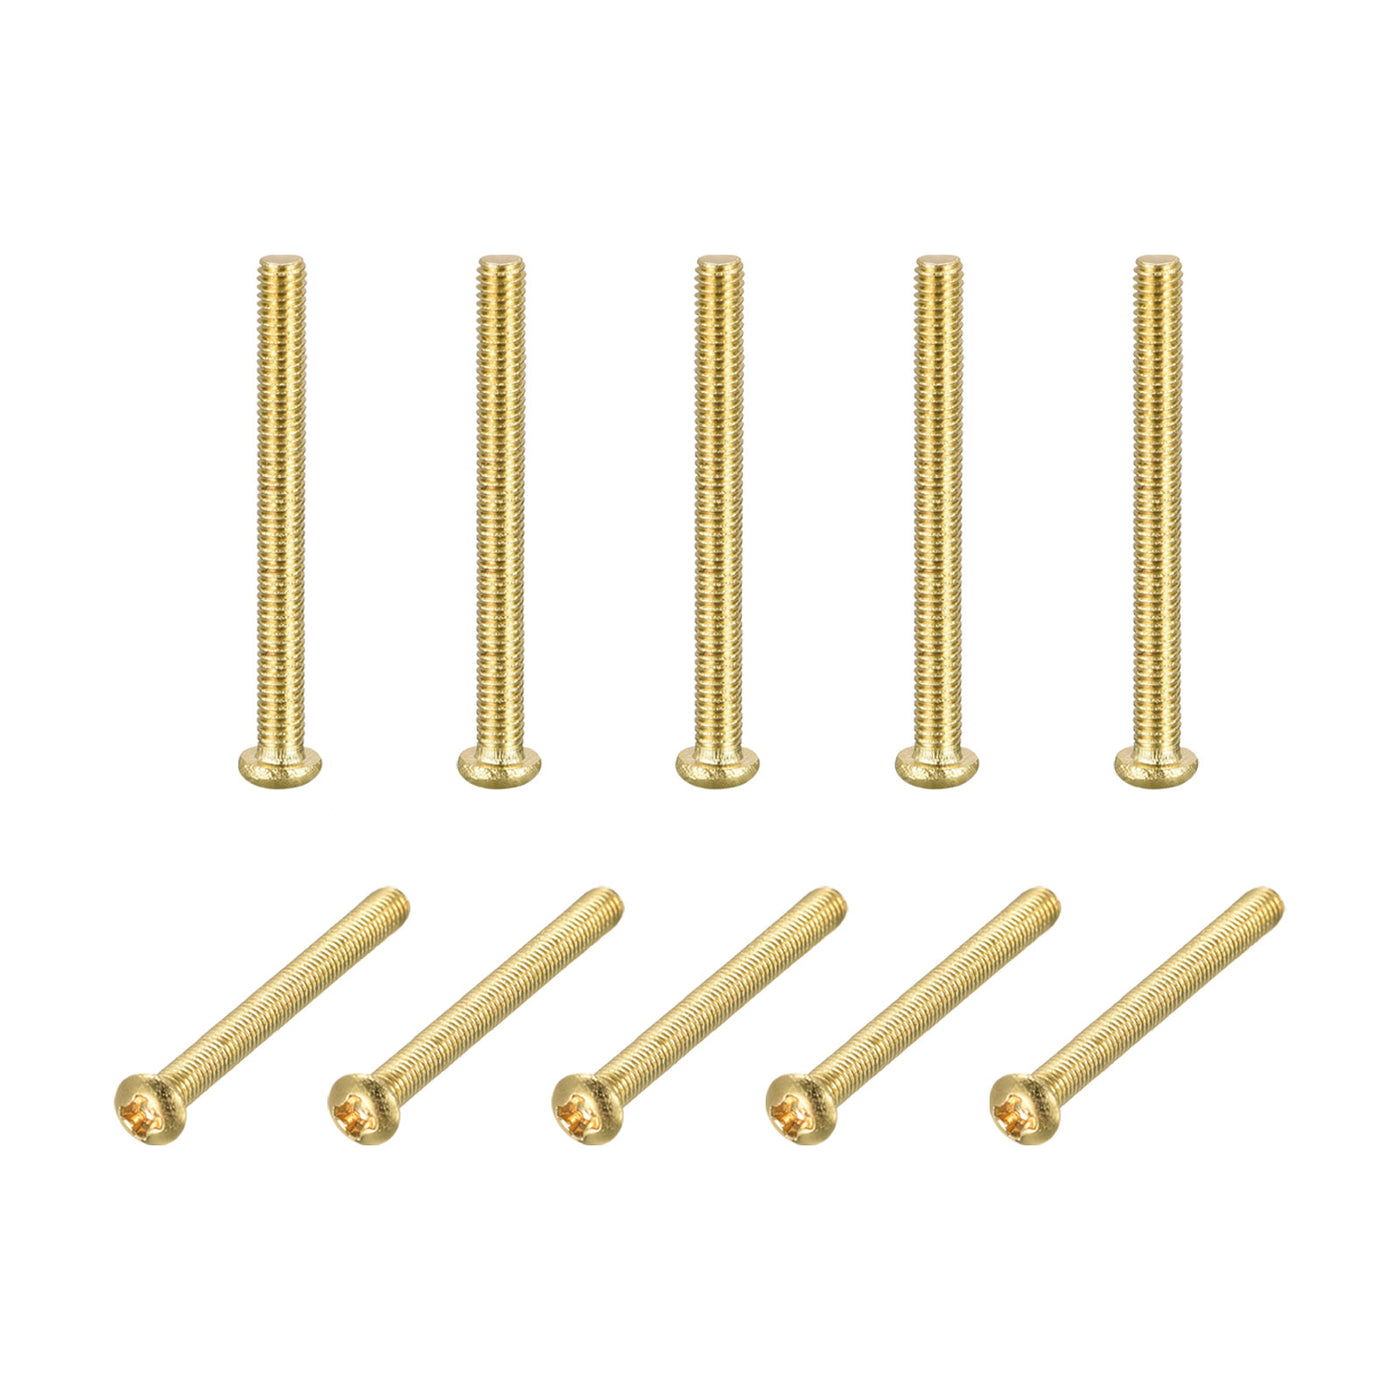 uxcell Uxcell Brass Machine Screws, M3x30mm Phillips Pan Head Fastener Bolts for Furniture, Office Equipment, Electronics 16Pcs